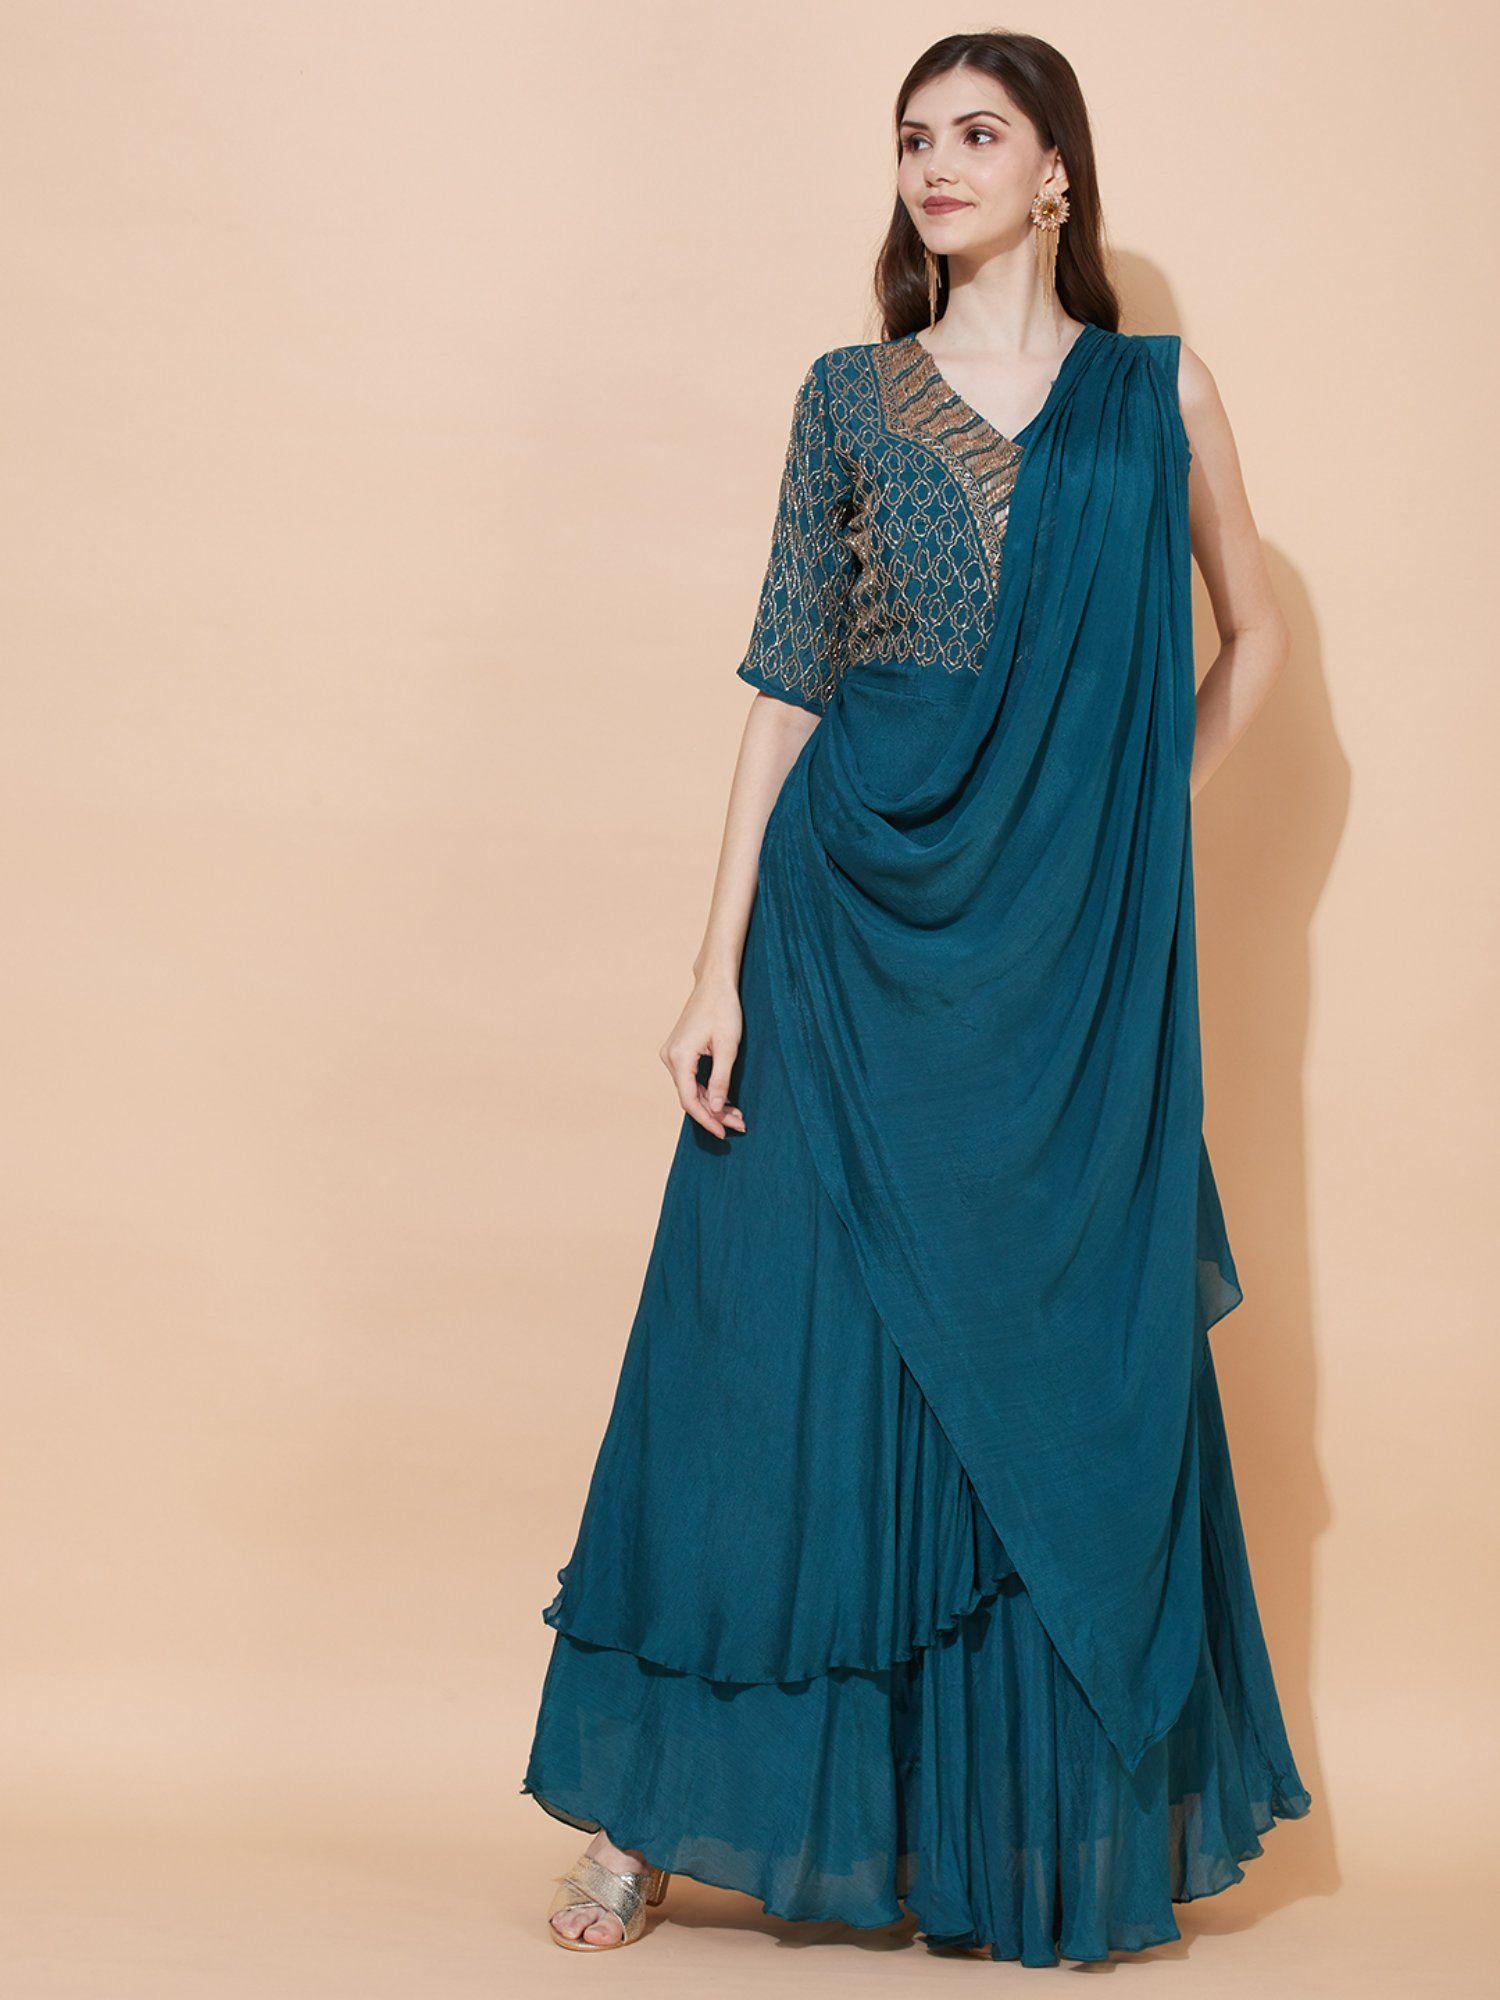 Ethnic Hand Embroidered Layered Flared Maxi Dress - Teal